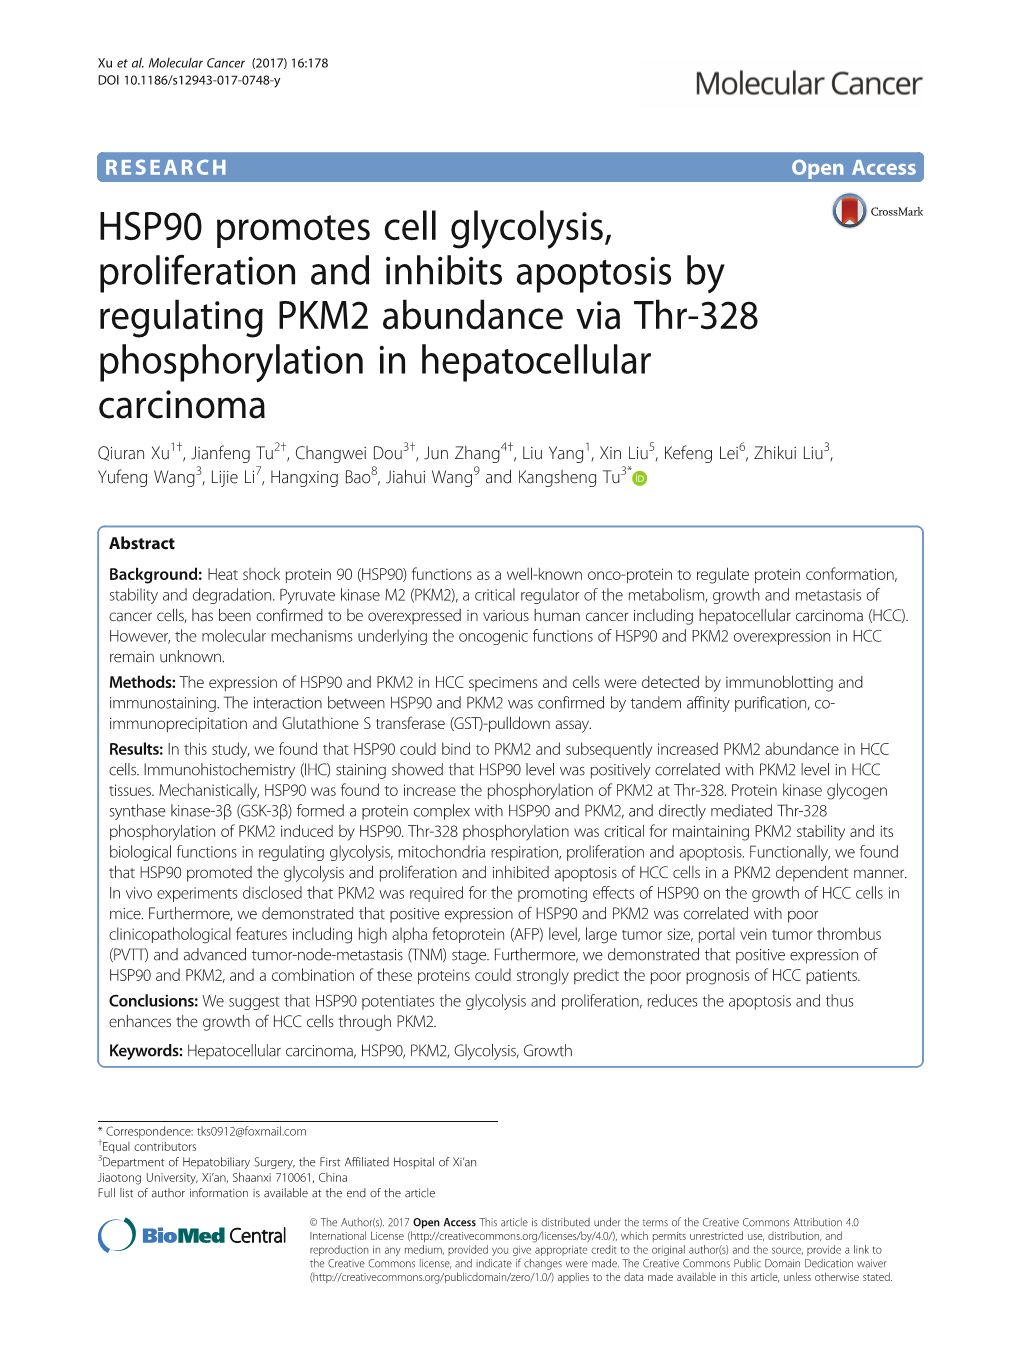 HSP90 Promotes Cell Glycolysis, Proliferation and Inhibits Apoptosis